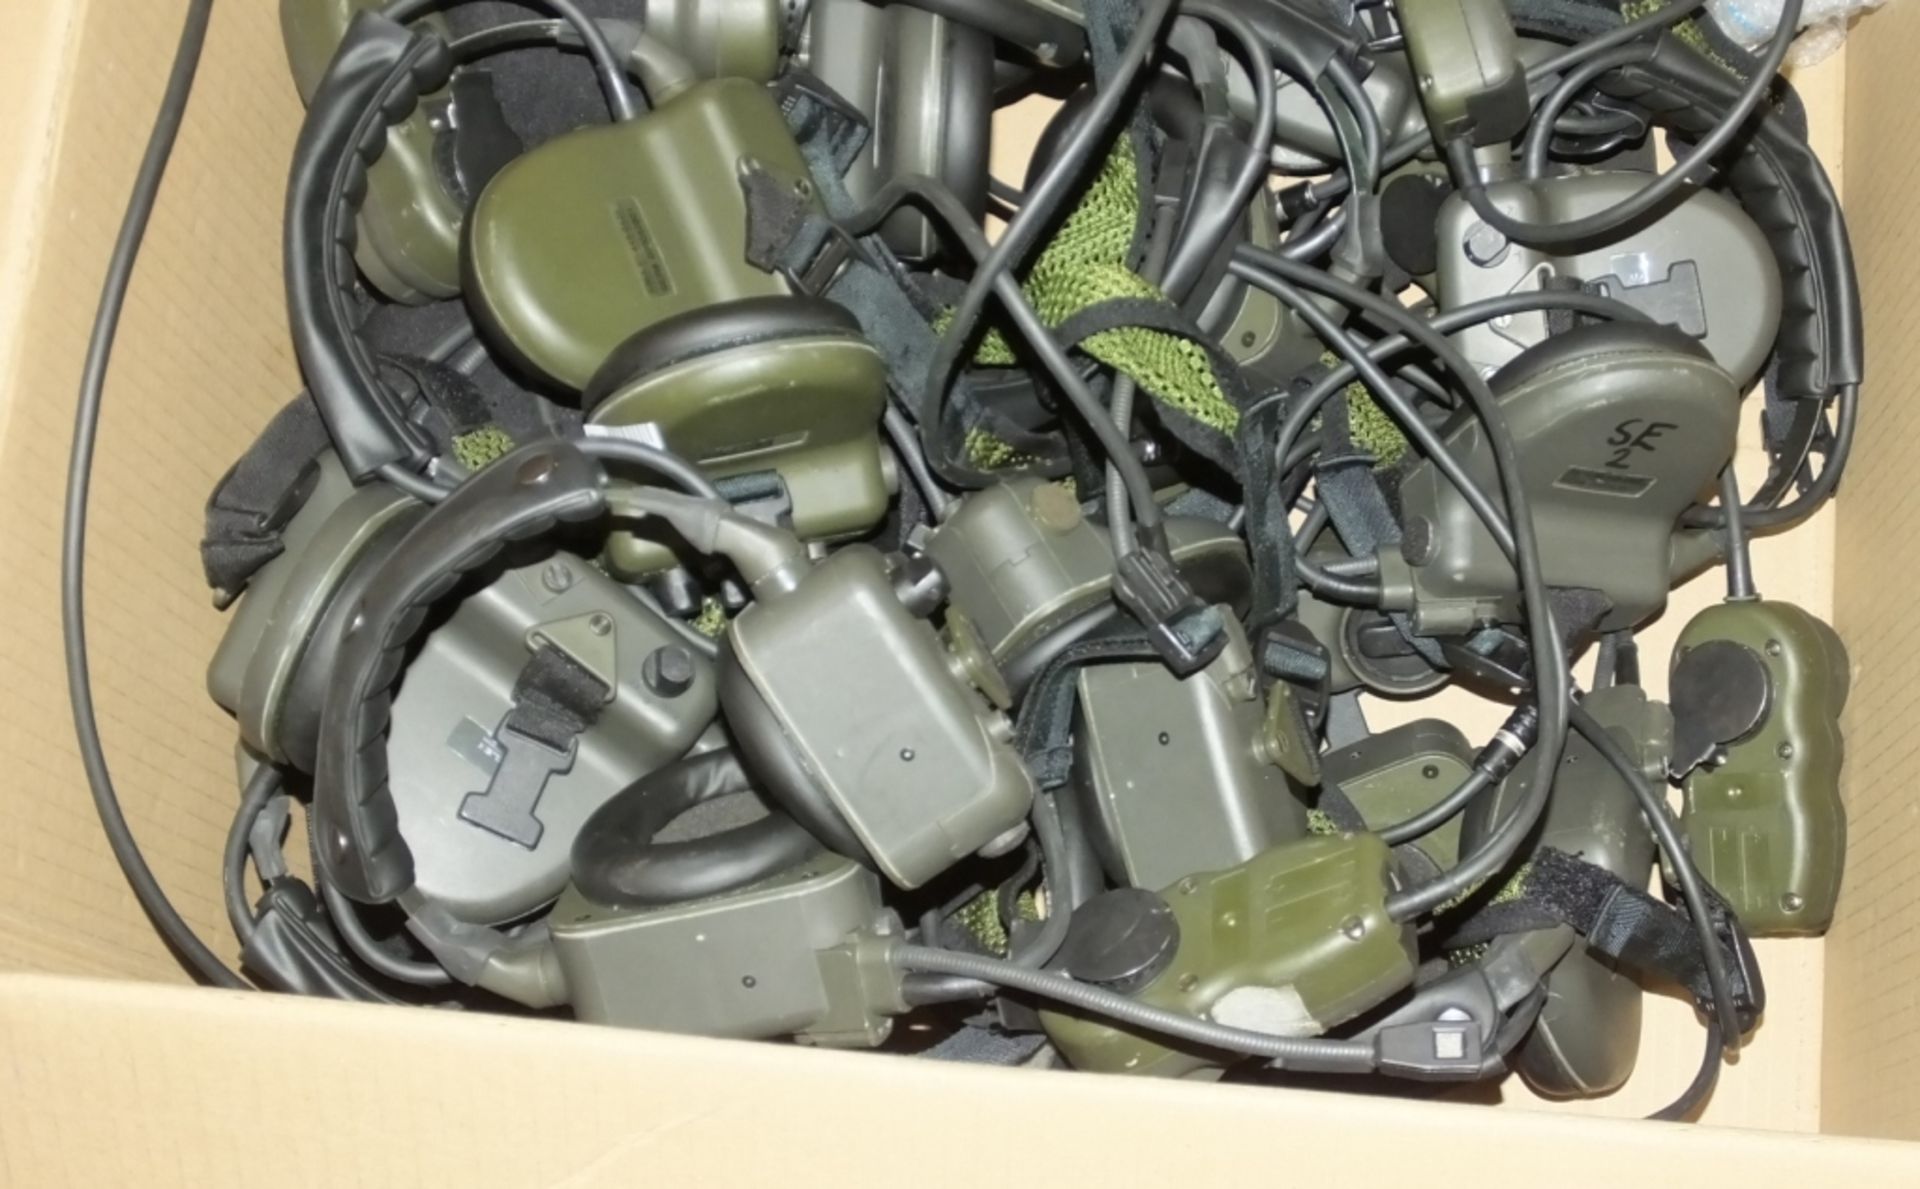 12x Selex Personal Role Radio H4855 Headsets - Image 2 of 3